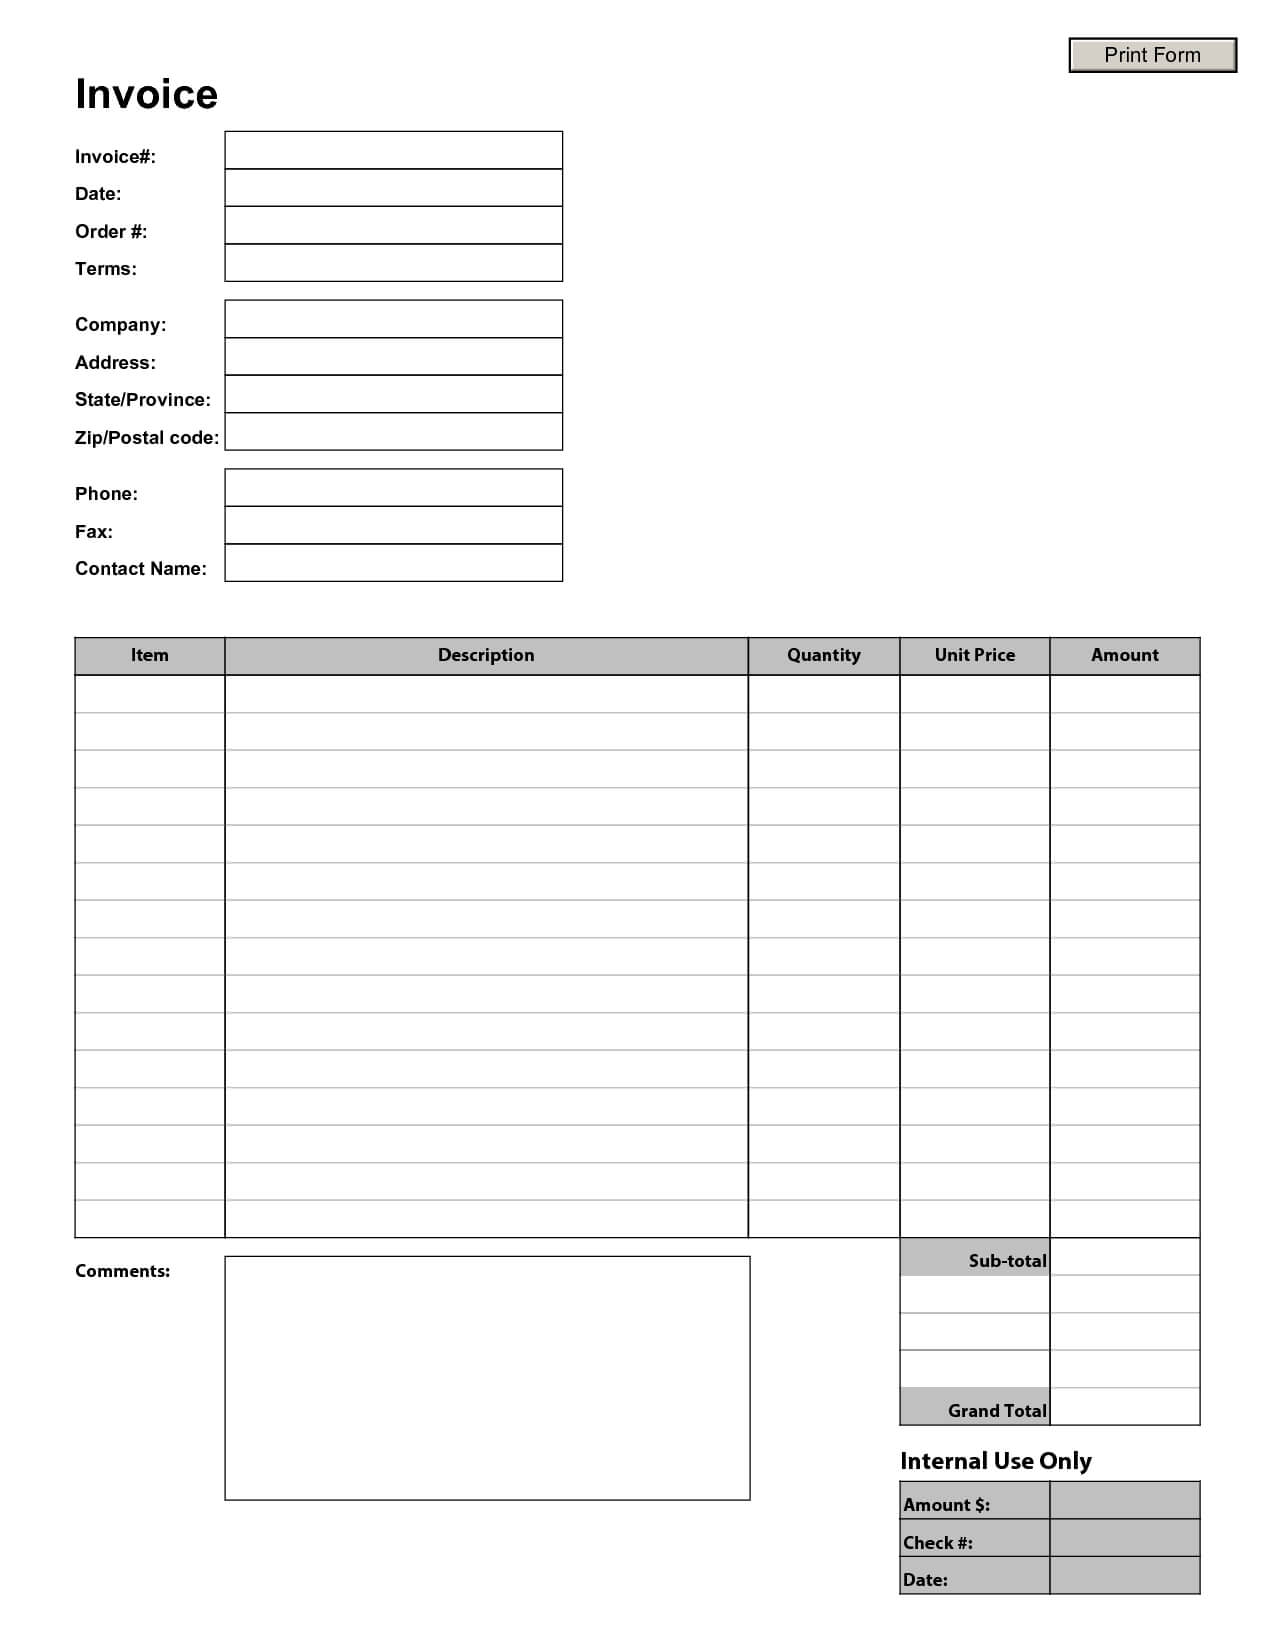 Blank Invoice Template | Blank Invoice | Arsenal | Printable In Free Printable Invoice Template Microsoft Word